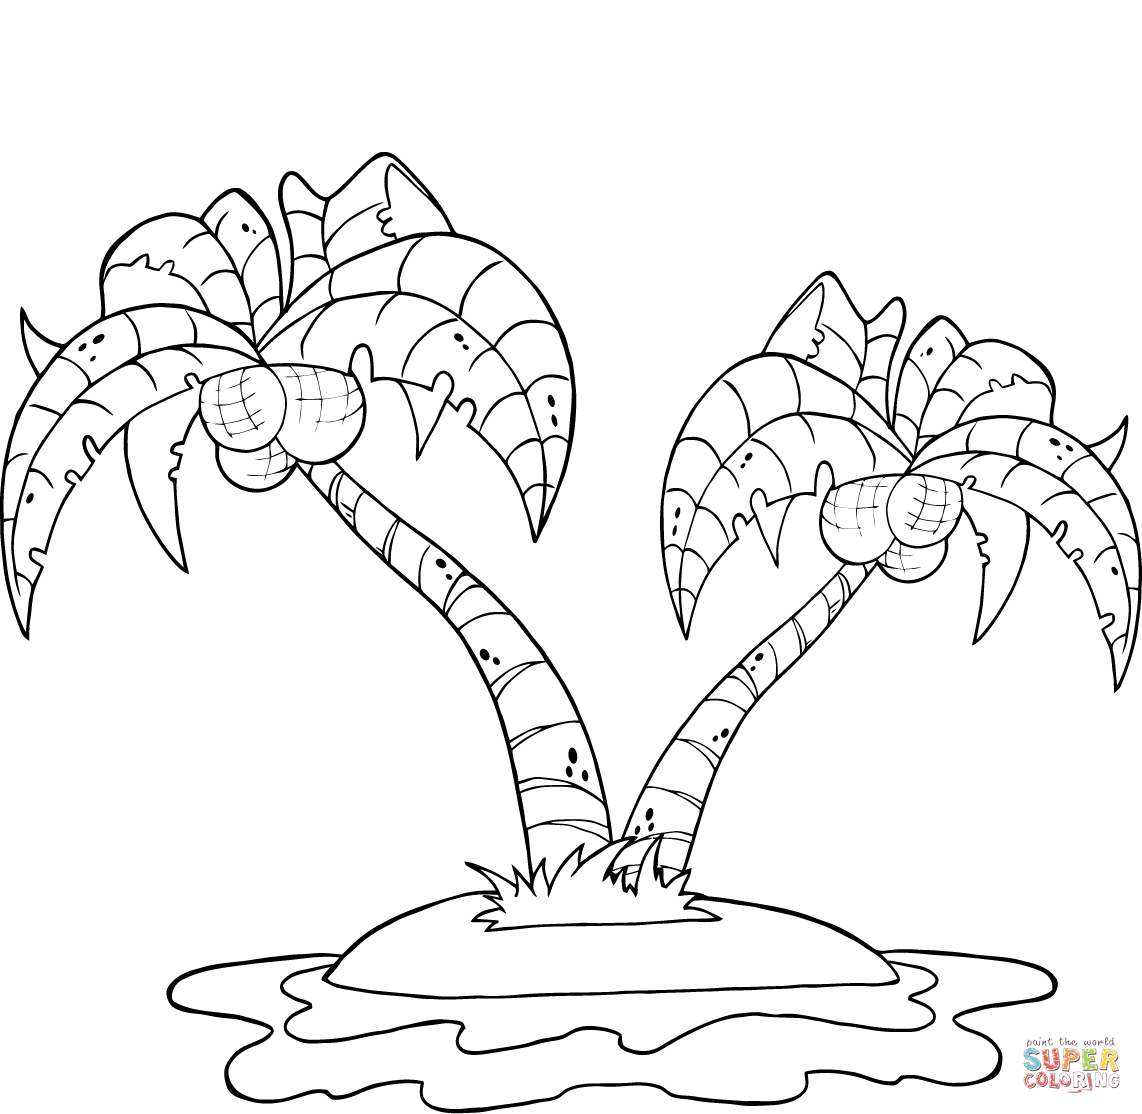 Coconut Palm Trees on Island coloring page | Free Printable Coloring Pages